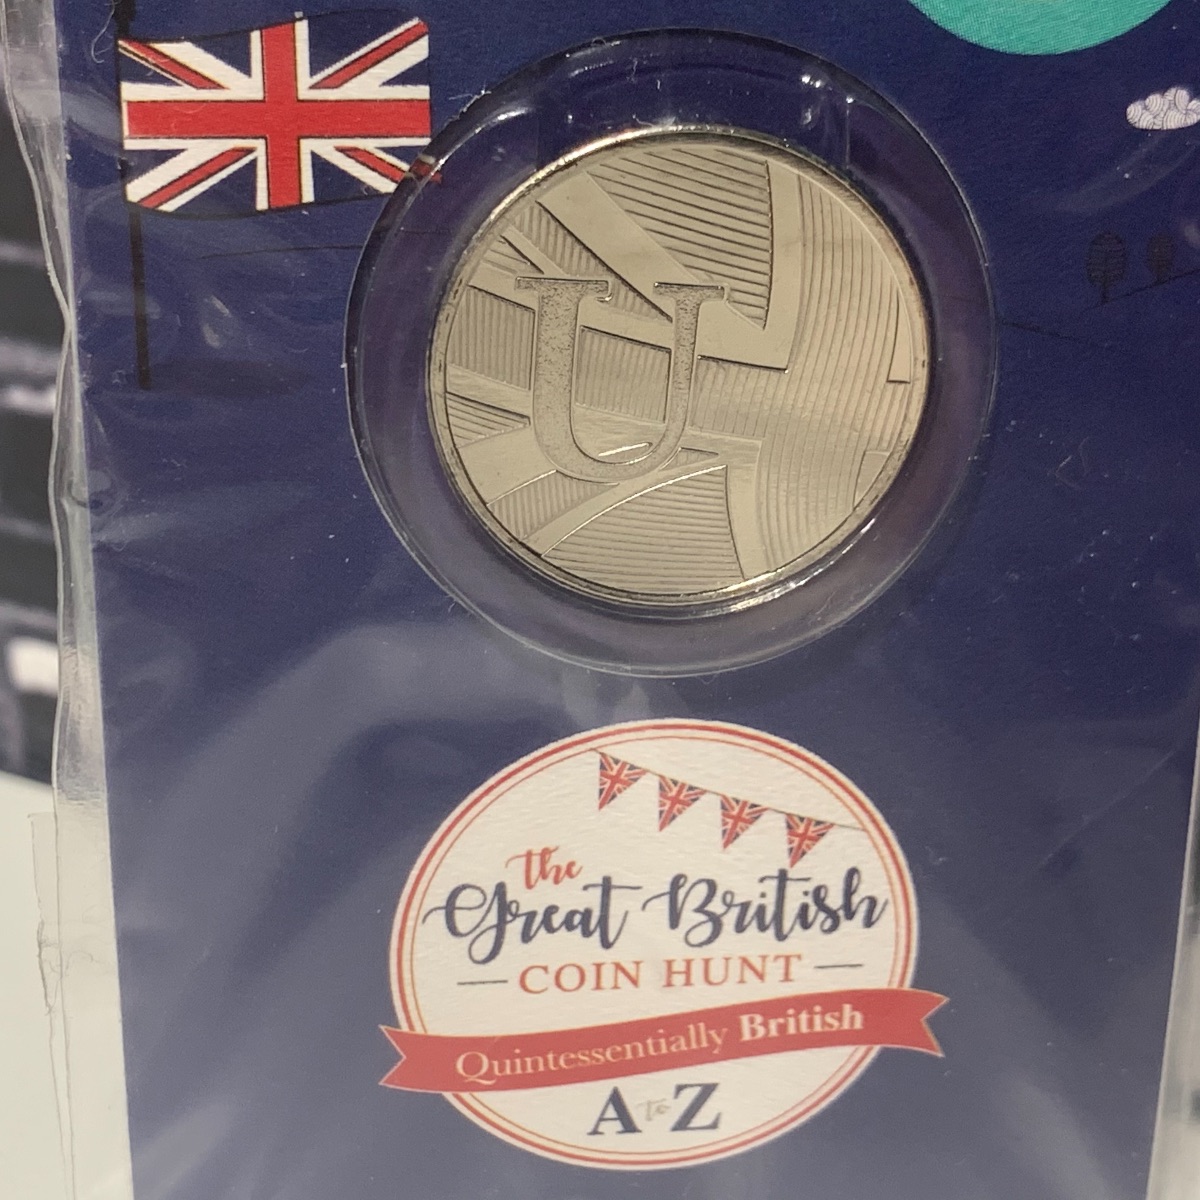 U for Unionjack 10p Coin Alphabet Letter Uncirculated Great British Hunt A-Z UK18UUNR 5026177404088 (Brand New & Sealed)